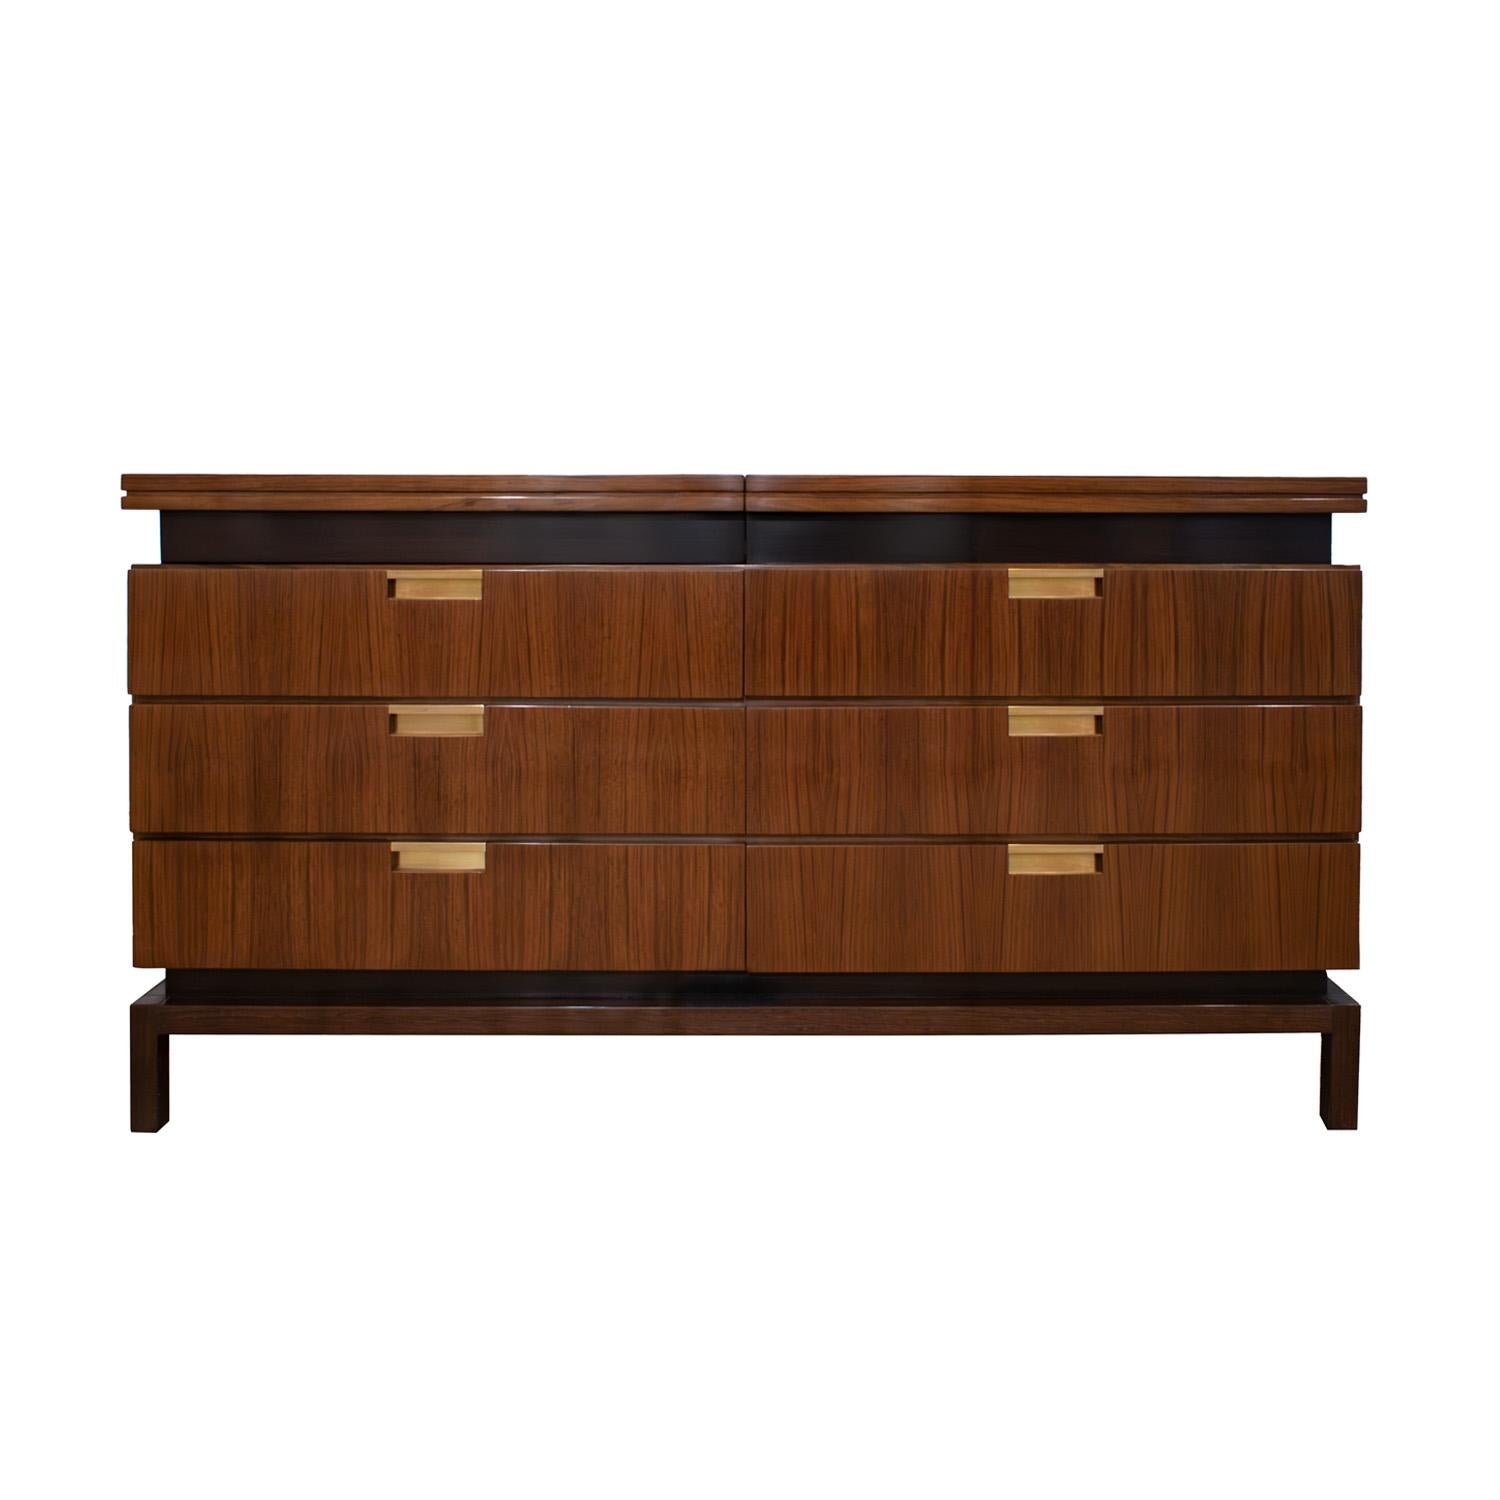 Beautifully crafted chest of drawers with sliding vanity compartment on the left and lift up storage compartment on the right in walnut with dark palmwood bases and bronze pulls by De Coene Frères , Belgium 1960's. The vanity compartment is pulled